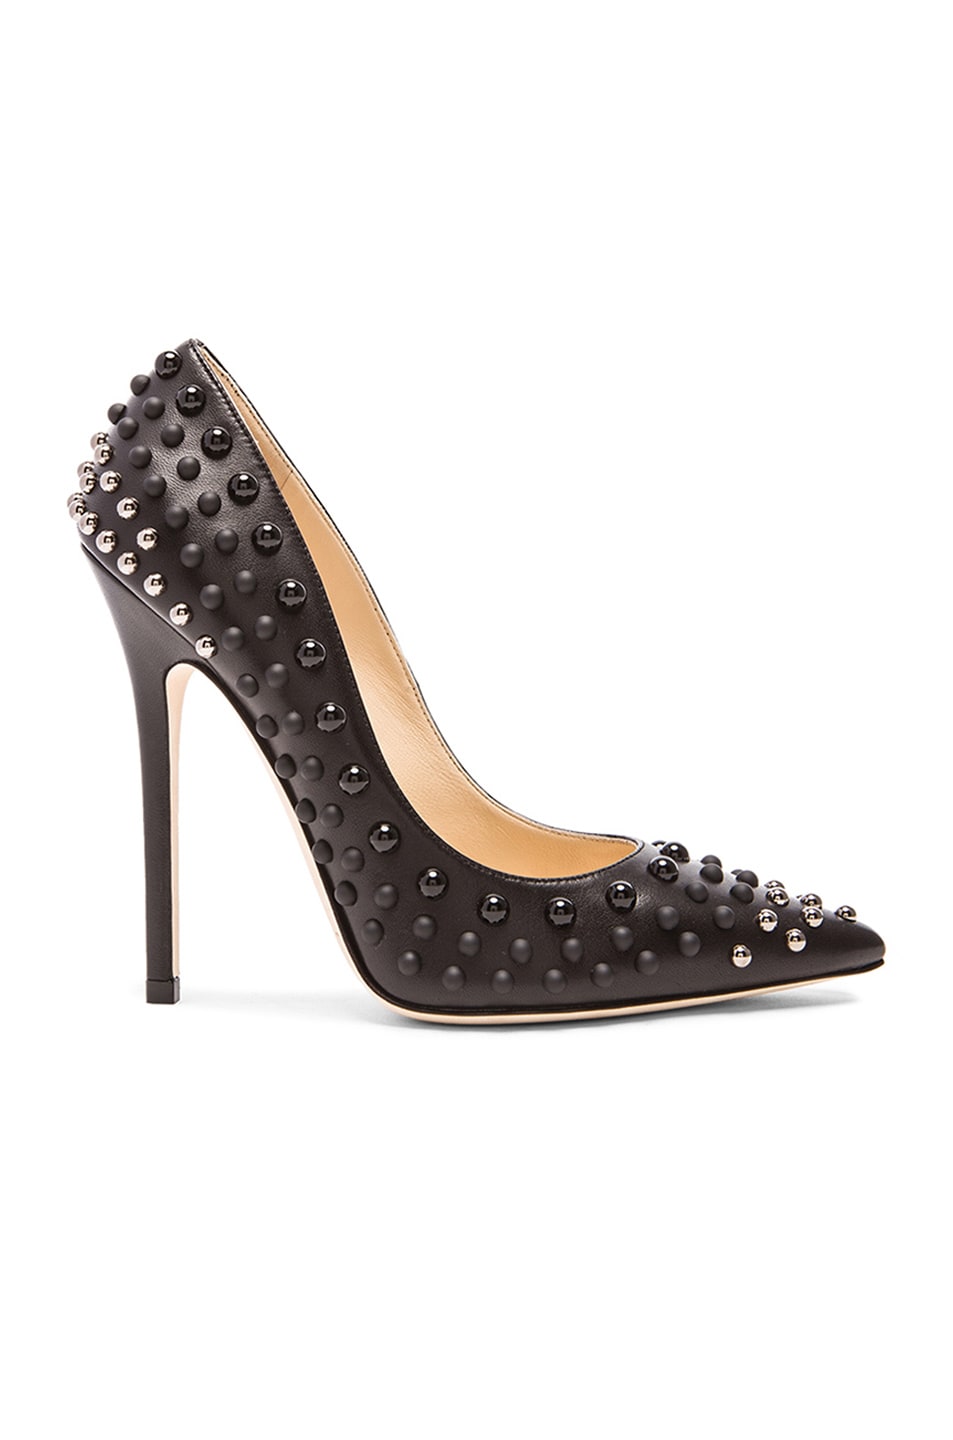 Image 1 of Jimmy Choo Anouk Leather Pumps in Black & Silver